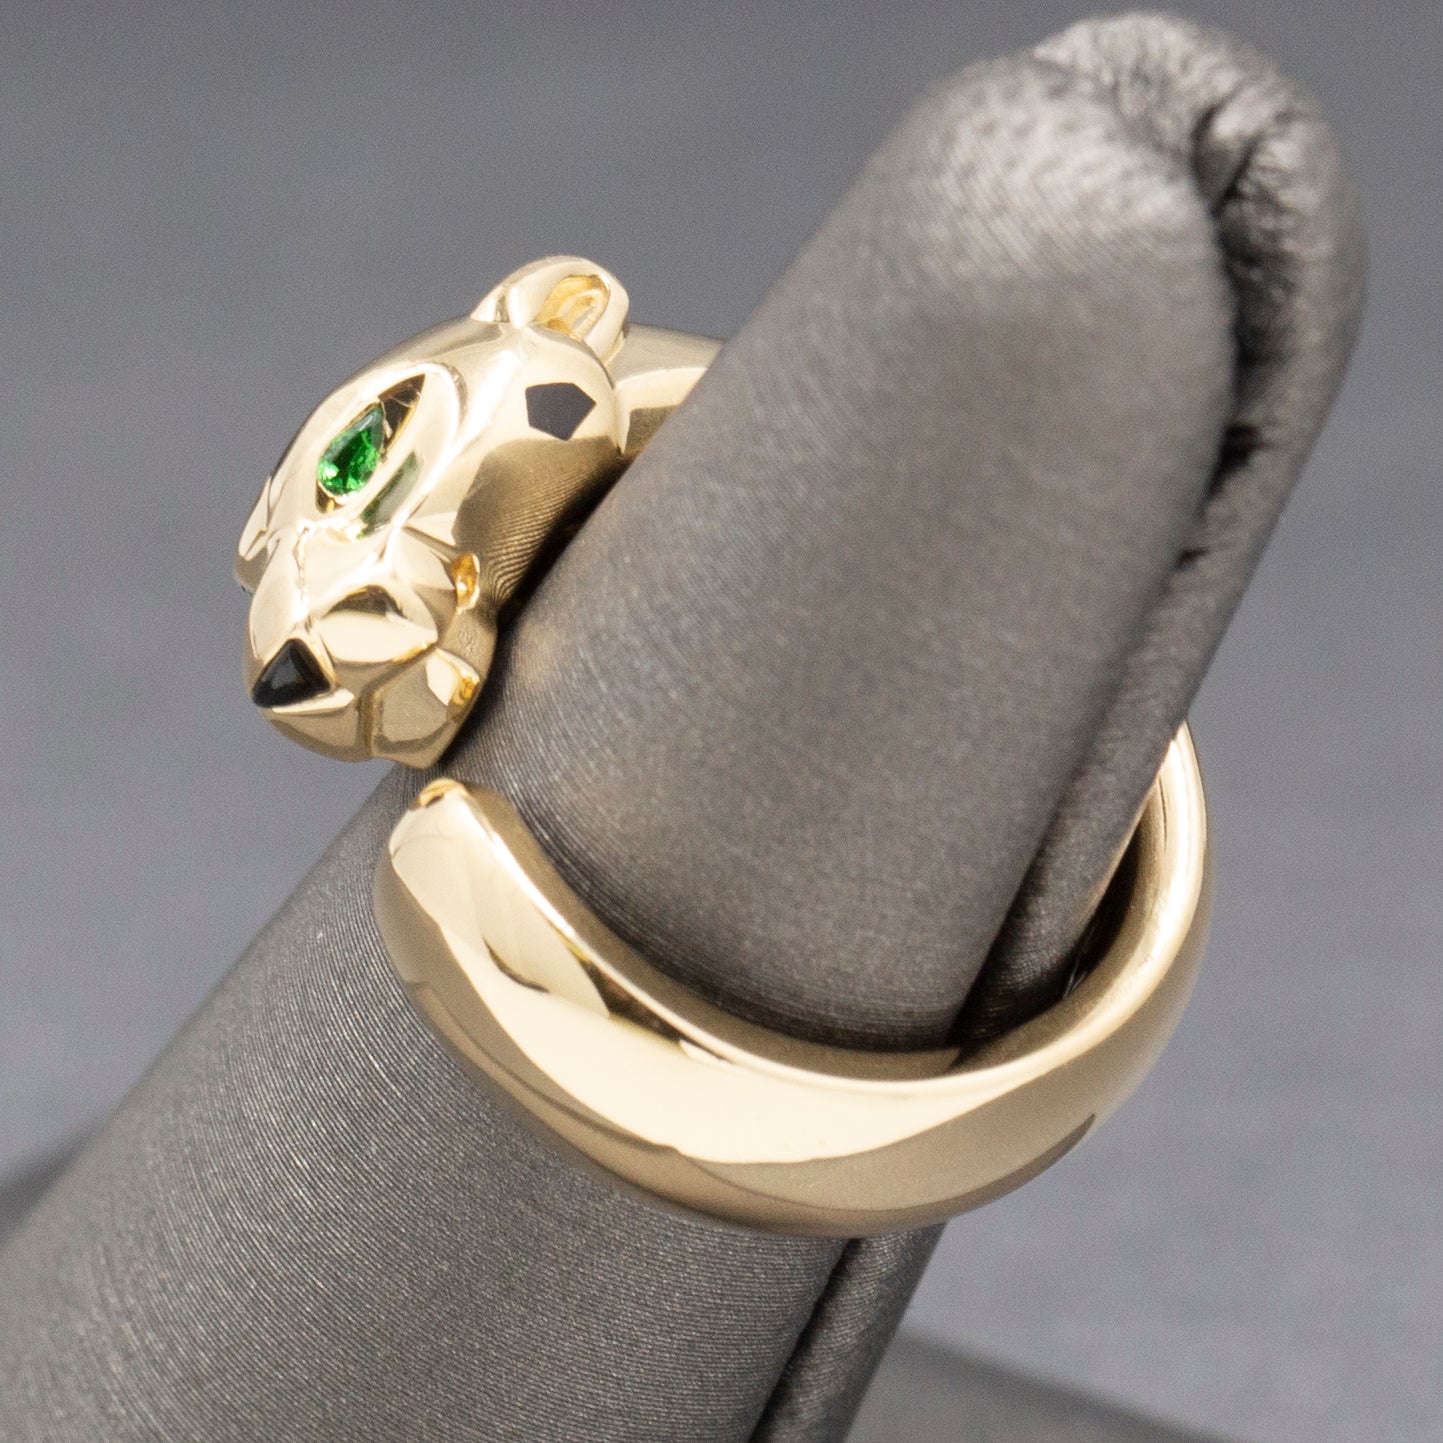 Panthere de Cartier Ring 18k Yellow Gold Tsavorite & Onyx Size 50 with Box and Papers